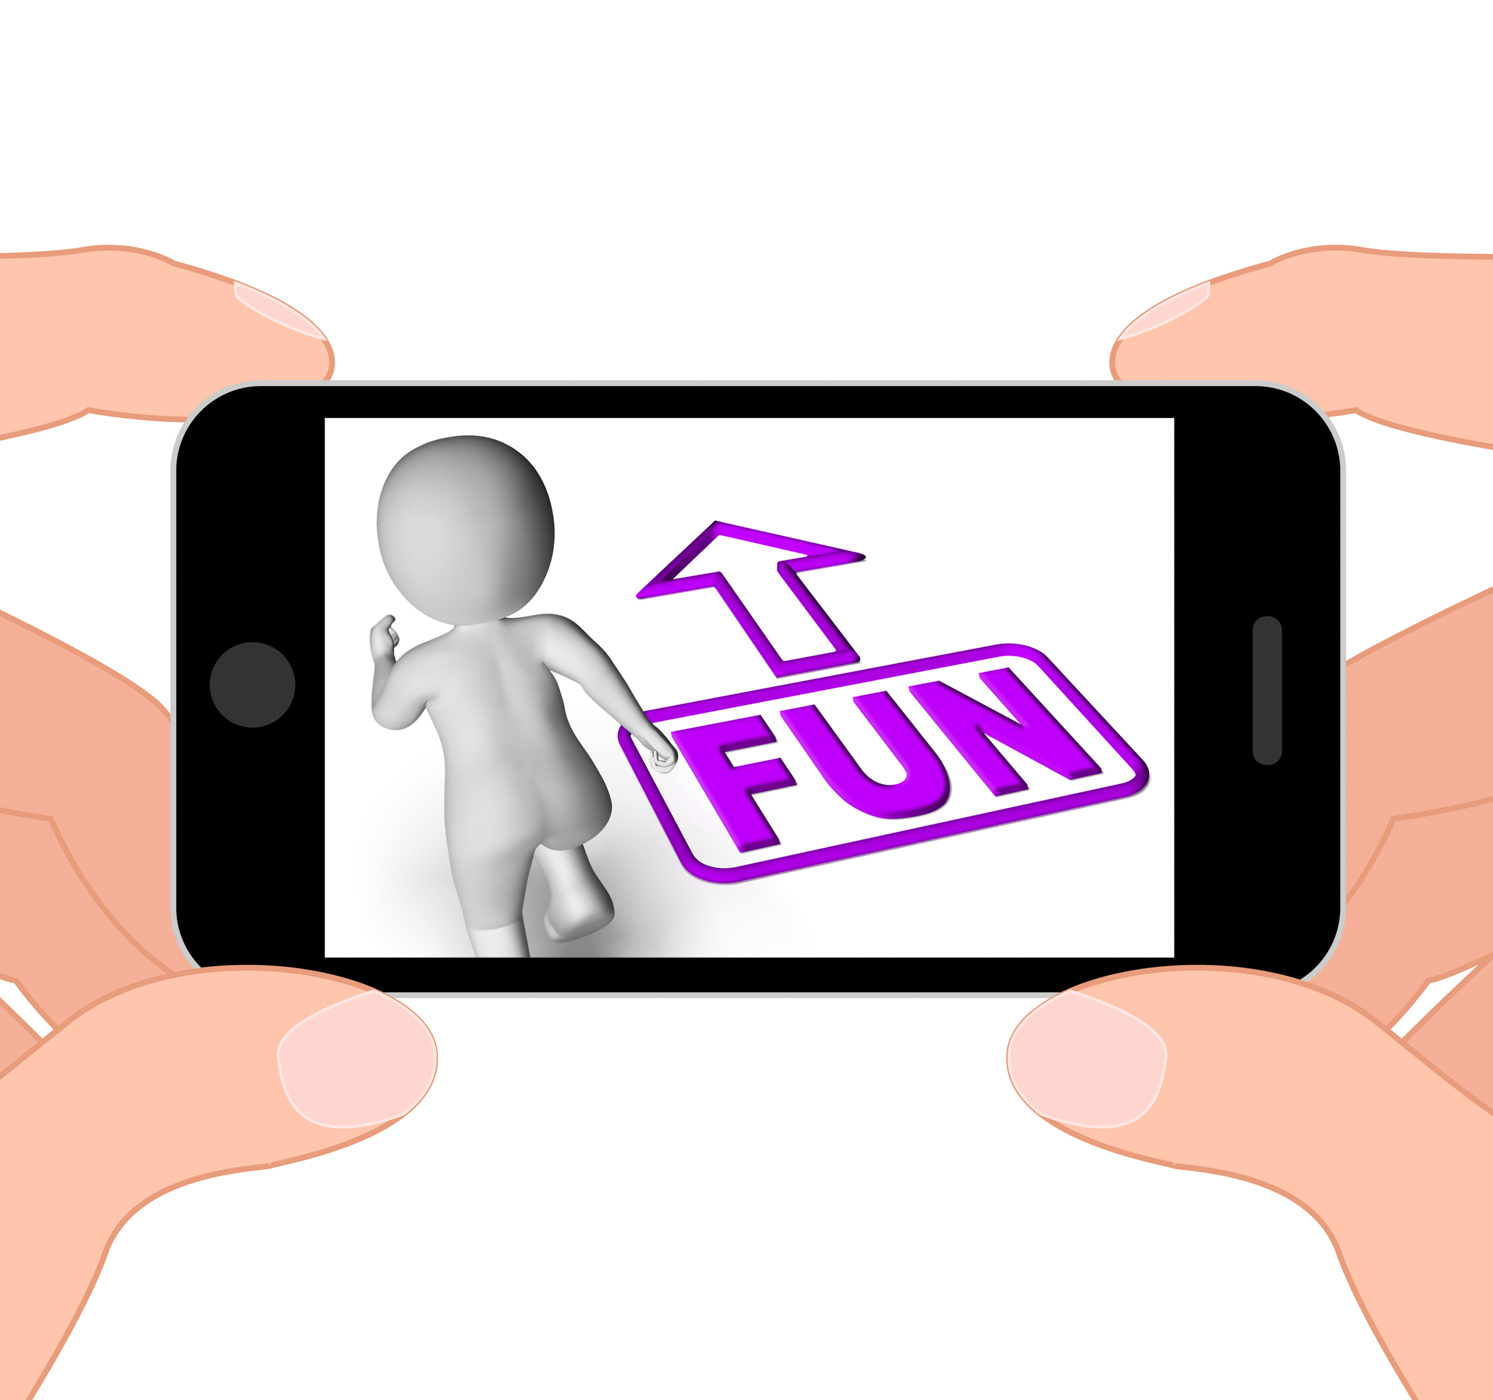 Fun and running 3d character displays amusement starting or party photo